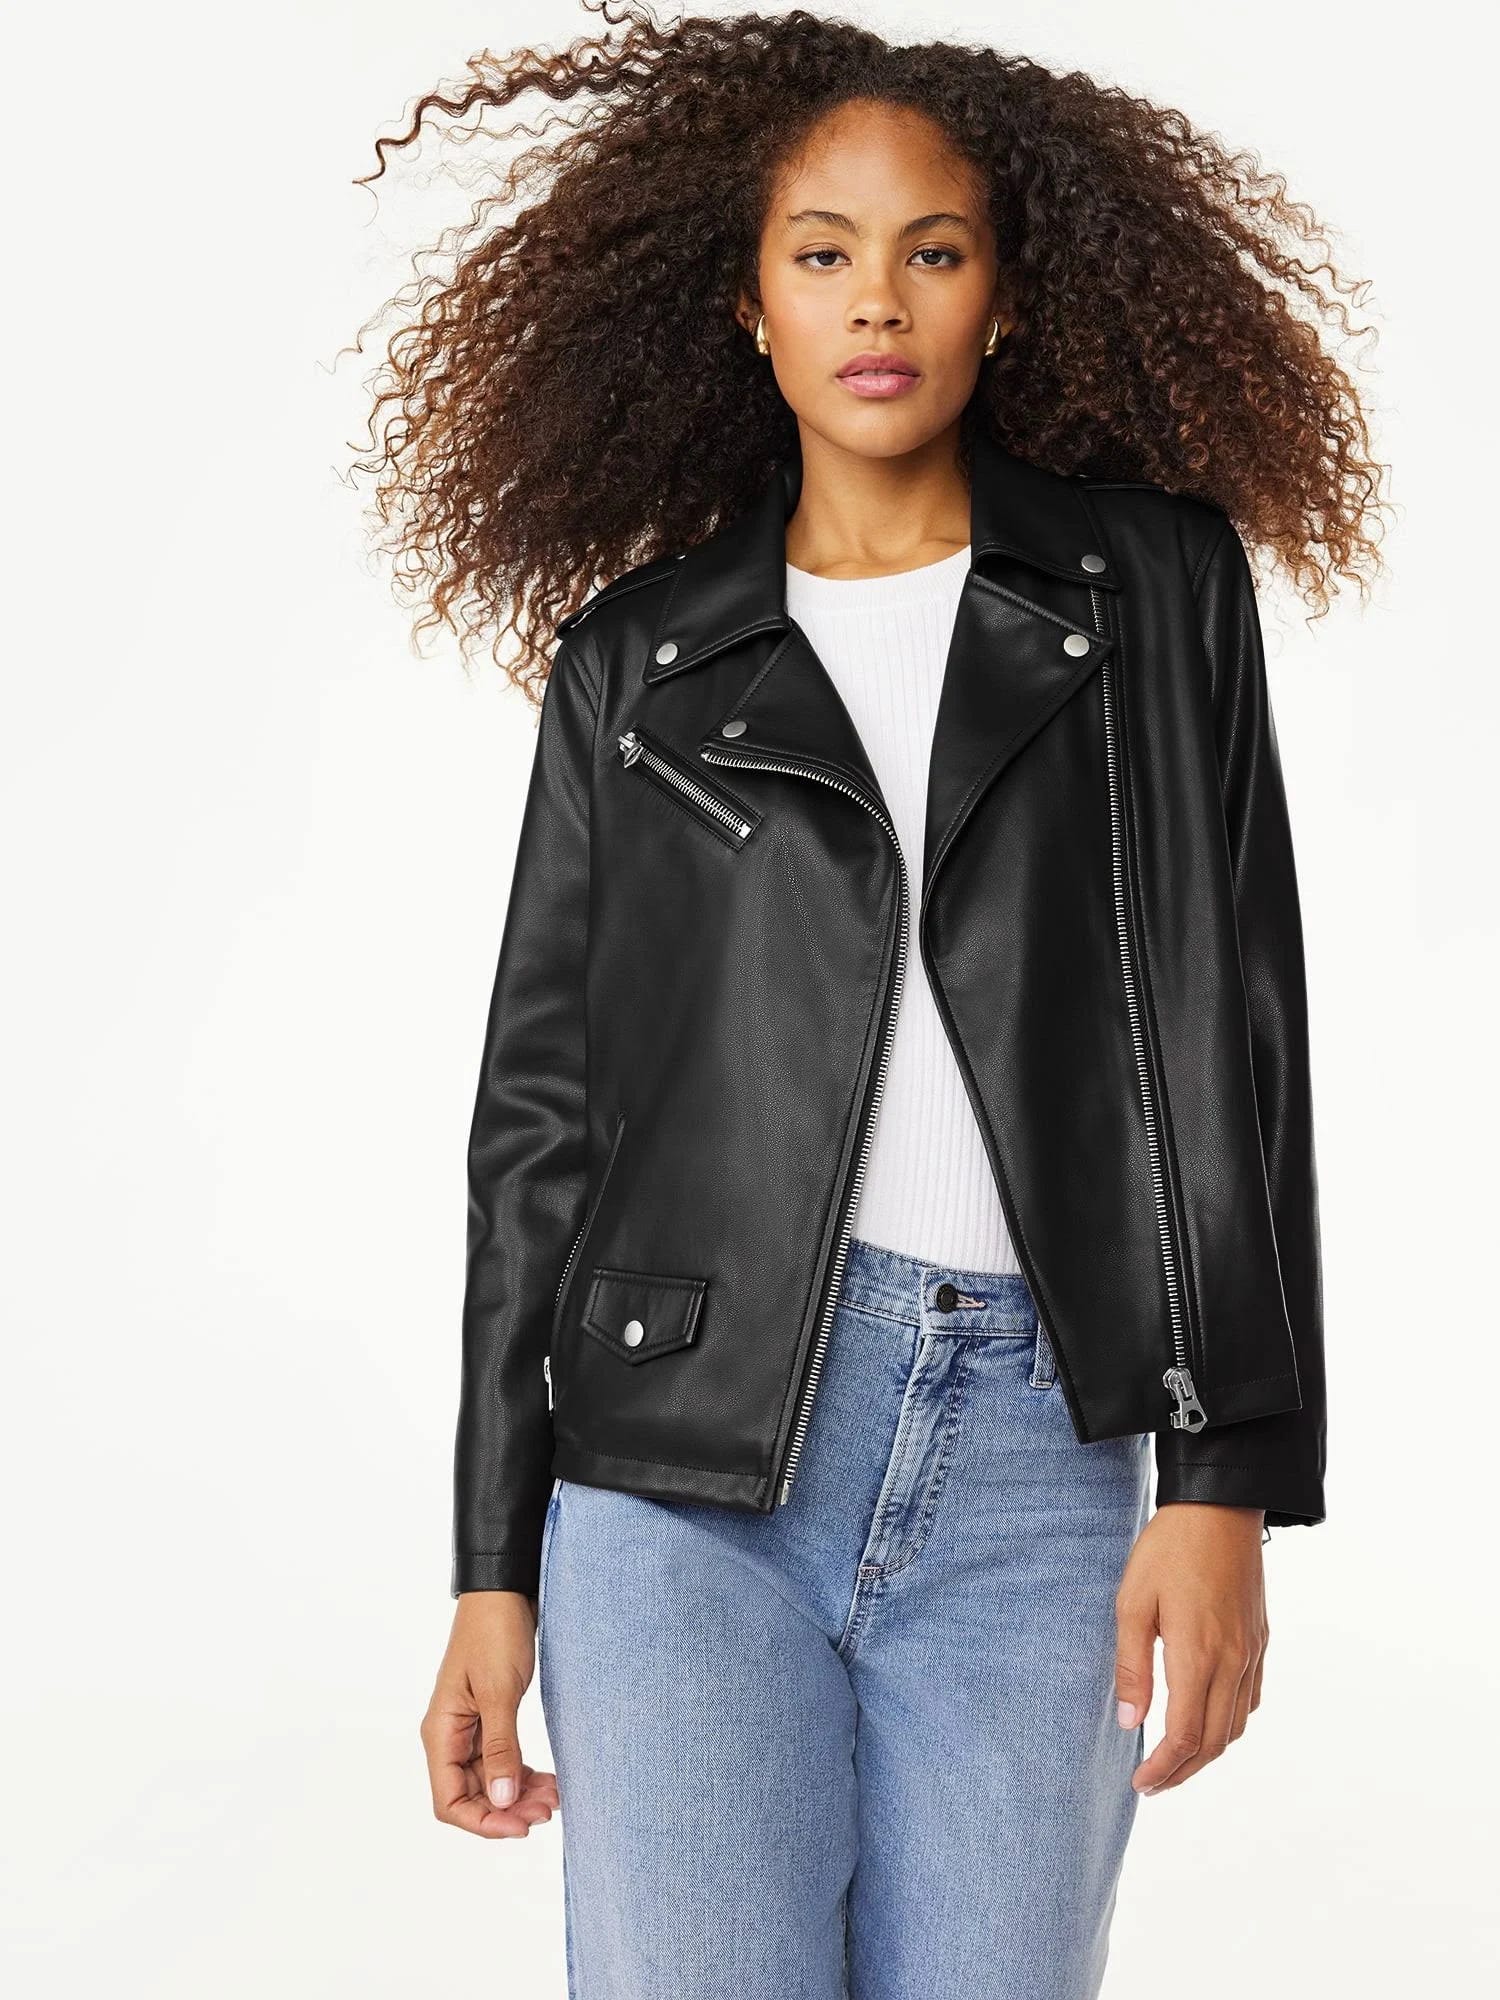 Scoop's Luxe Faux Leather Moto Jacket: Timeless Biker Style in Black | Image